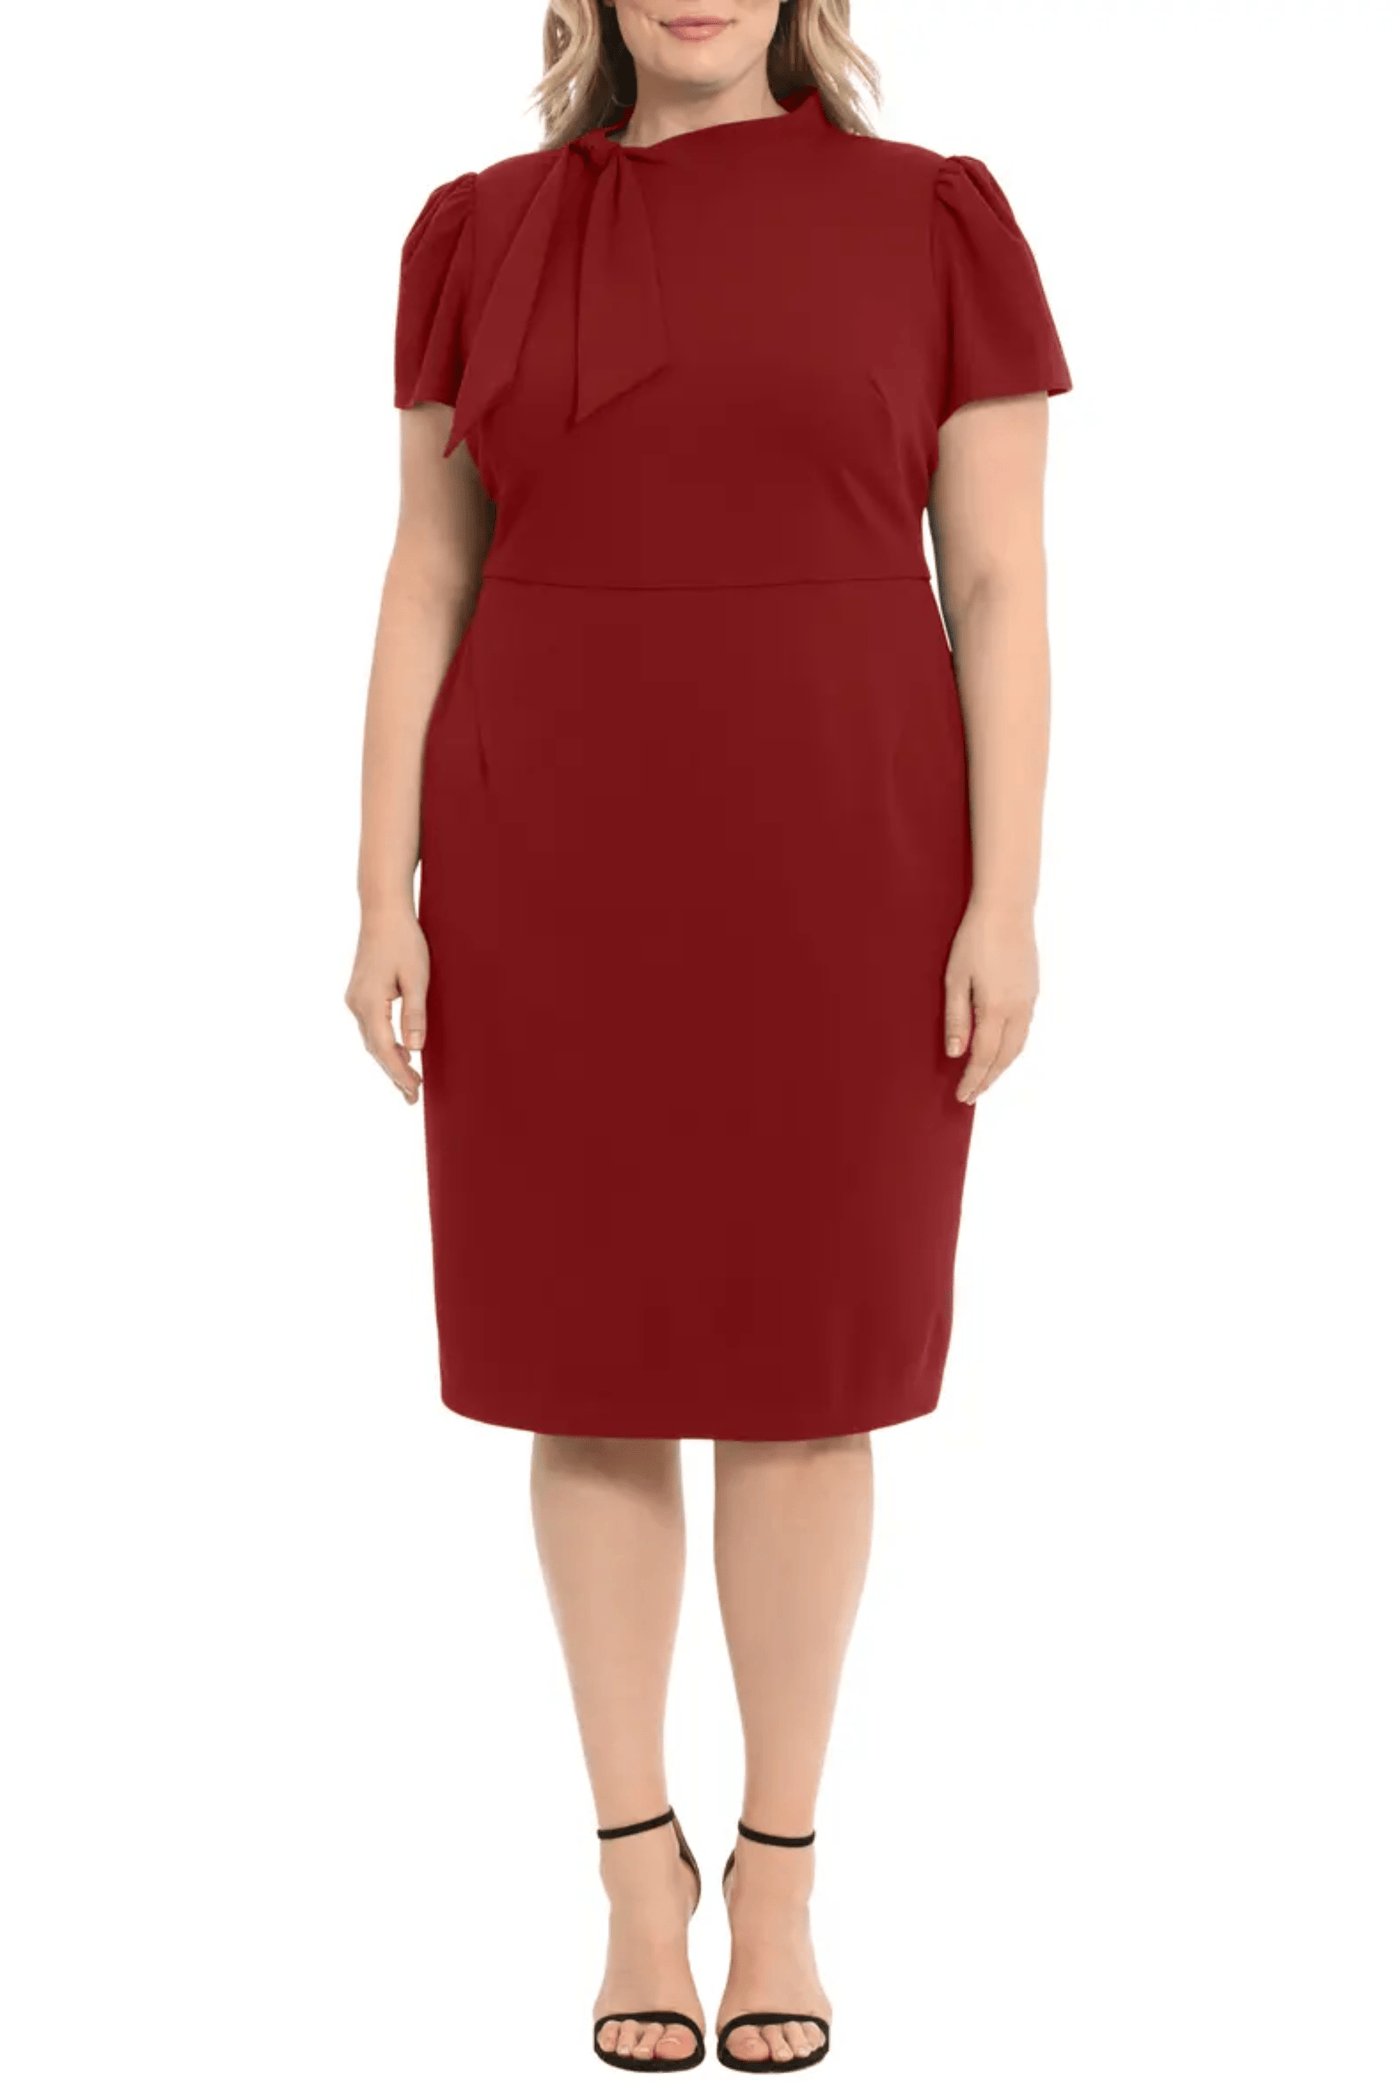 Maggy London G3779M - Tie Neck Sheath Dress Special Occasion Dresses